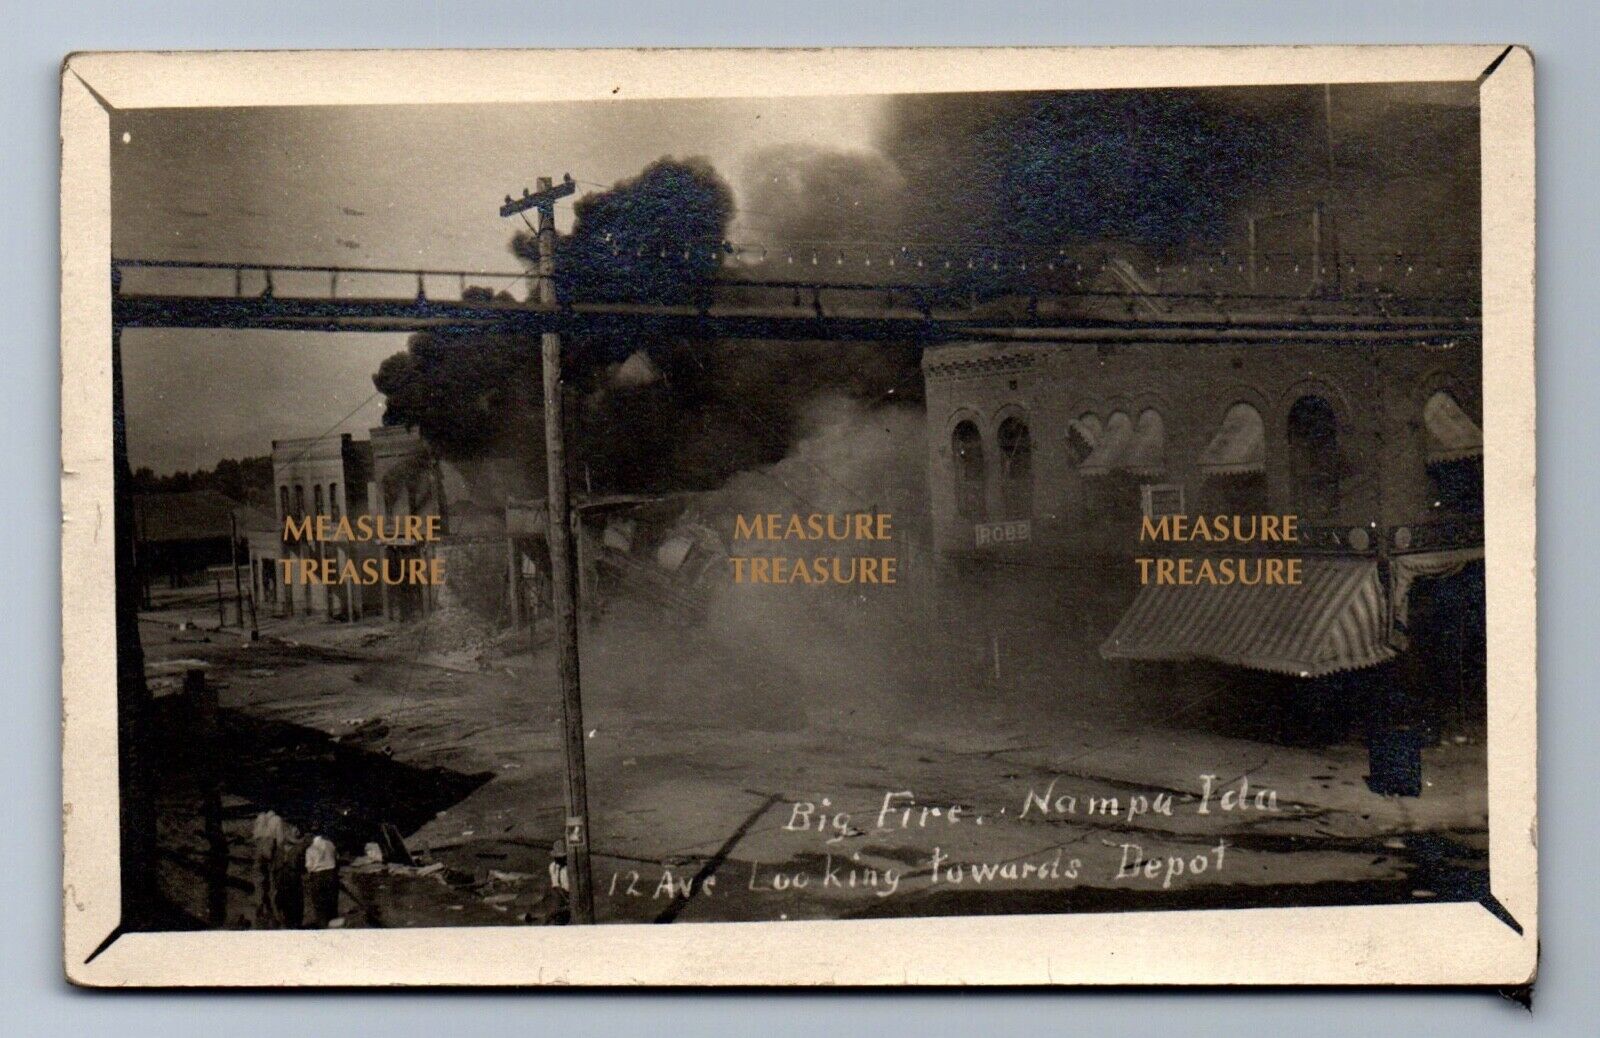 1909 RPPC GREAT FIRE NAMPA ID, 12 AVE, DEPOT, BANK, ROBB, ONLOOKERS Postcard PS